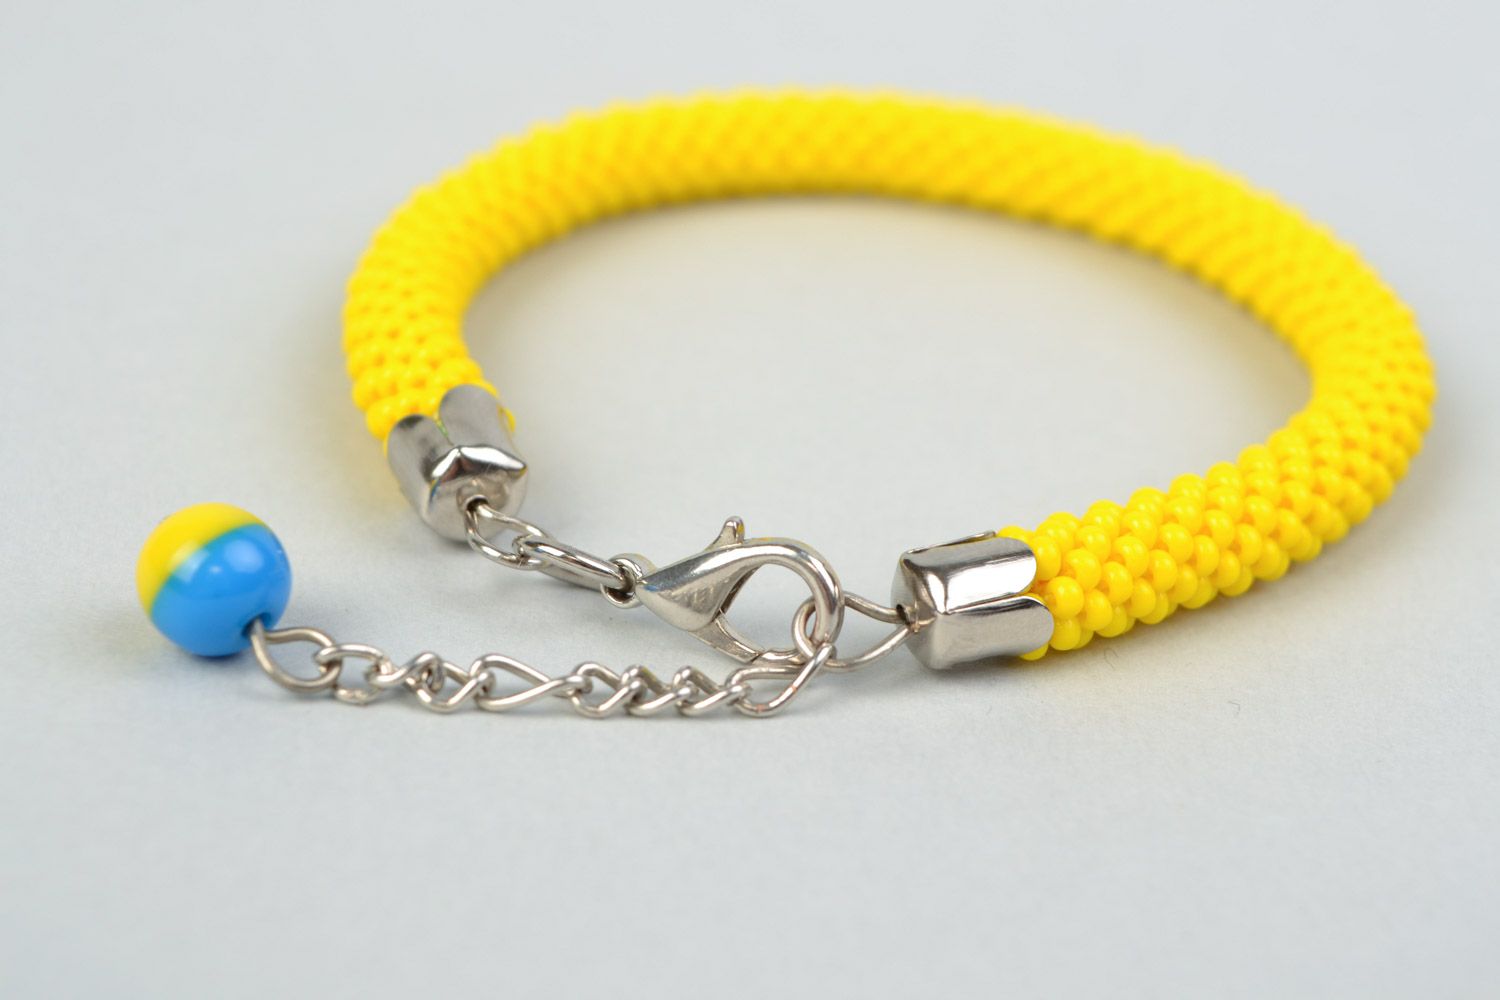 Handmade cord bracelet crocheted of bright yellow Czech beads with blue charm photo 3